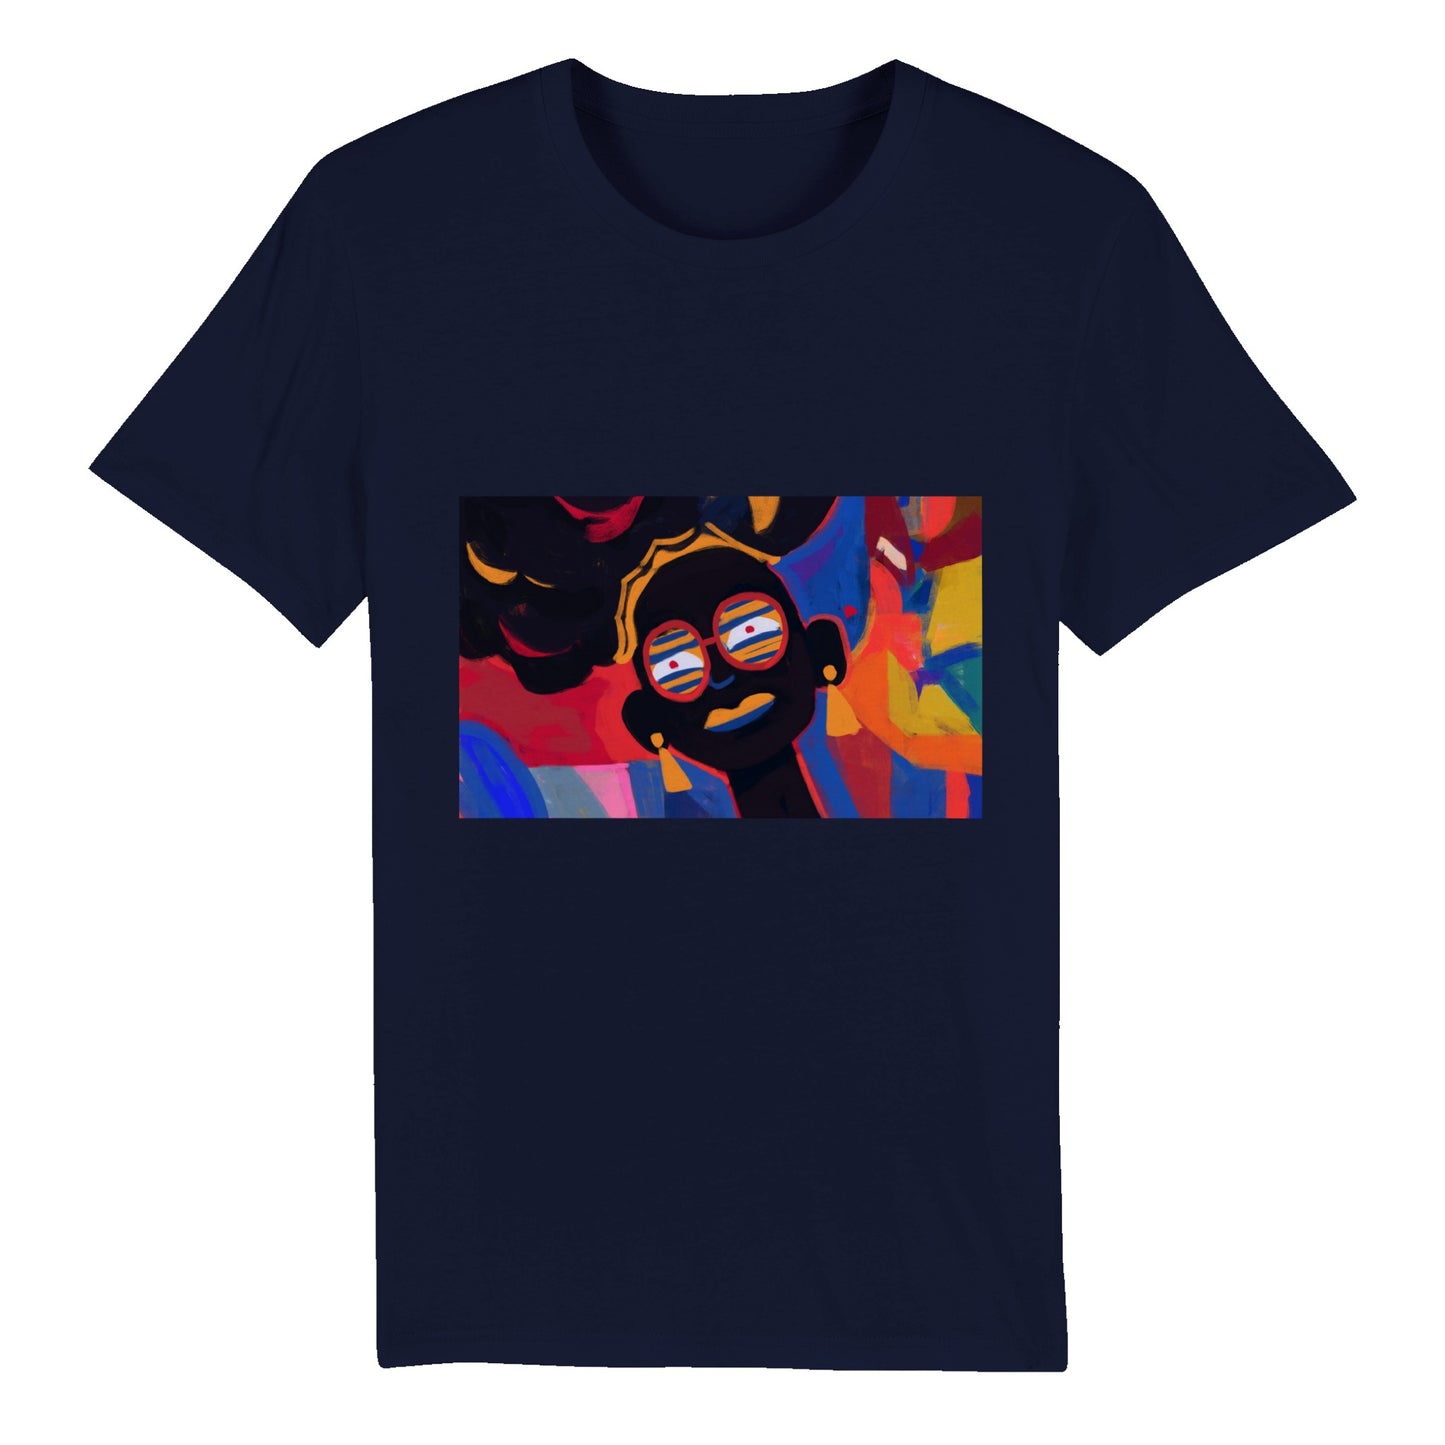 100% Organic Unisex T-shirt/Abstract-Afro